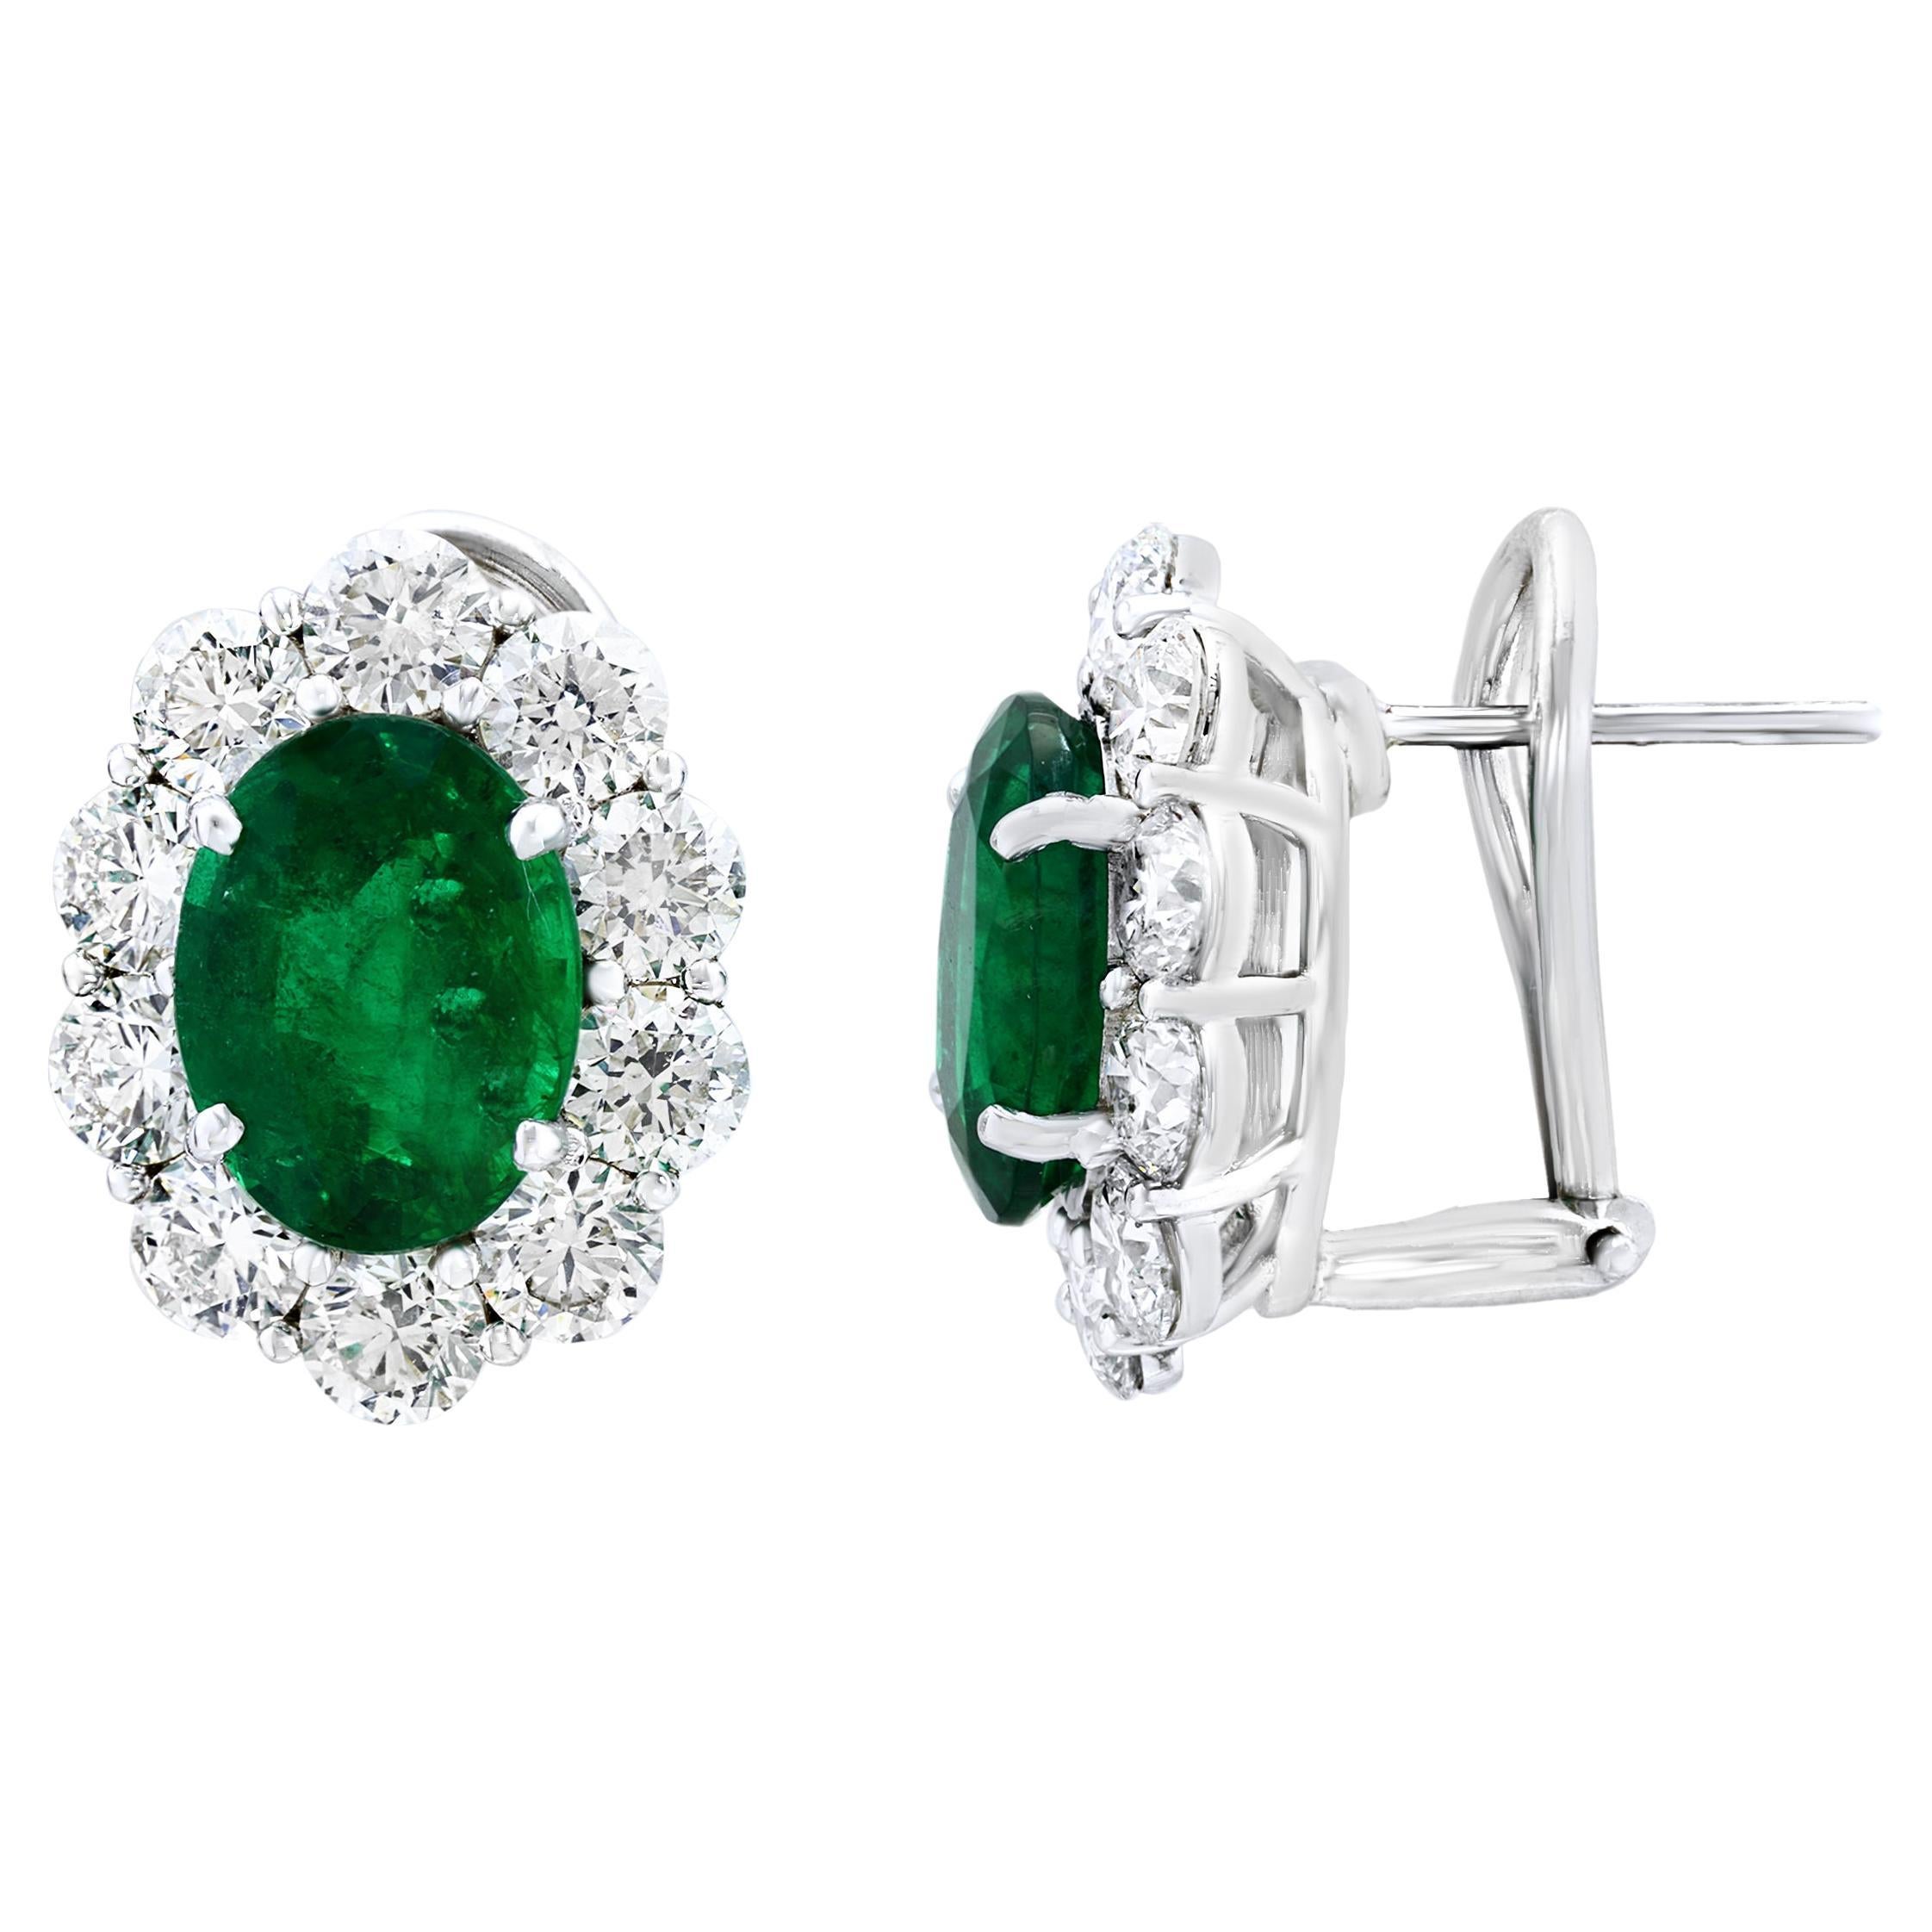 5.13 Carat Oval Cut Emerald and Diamond Halo Earrings in 18K White Gold For Sale